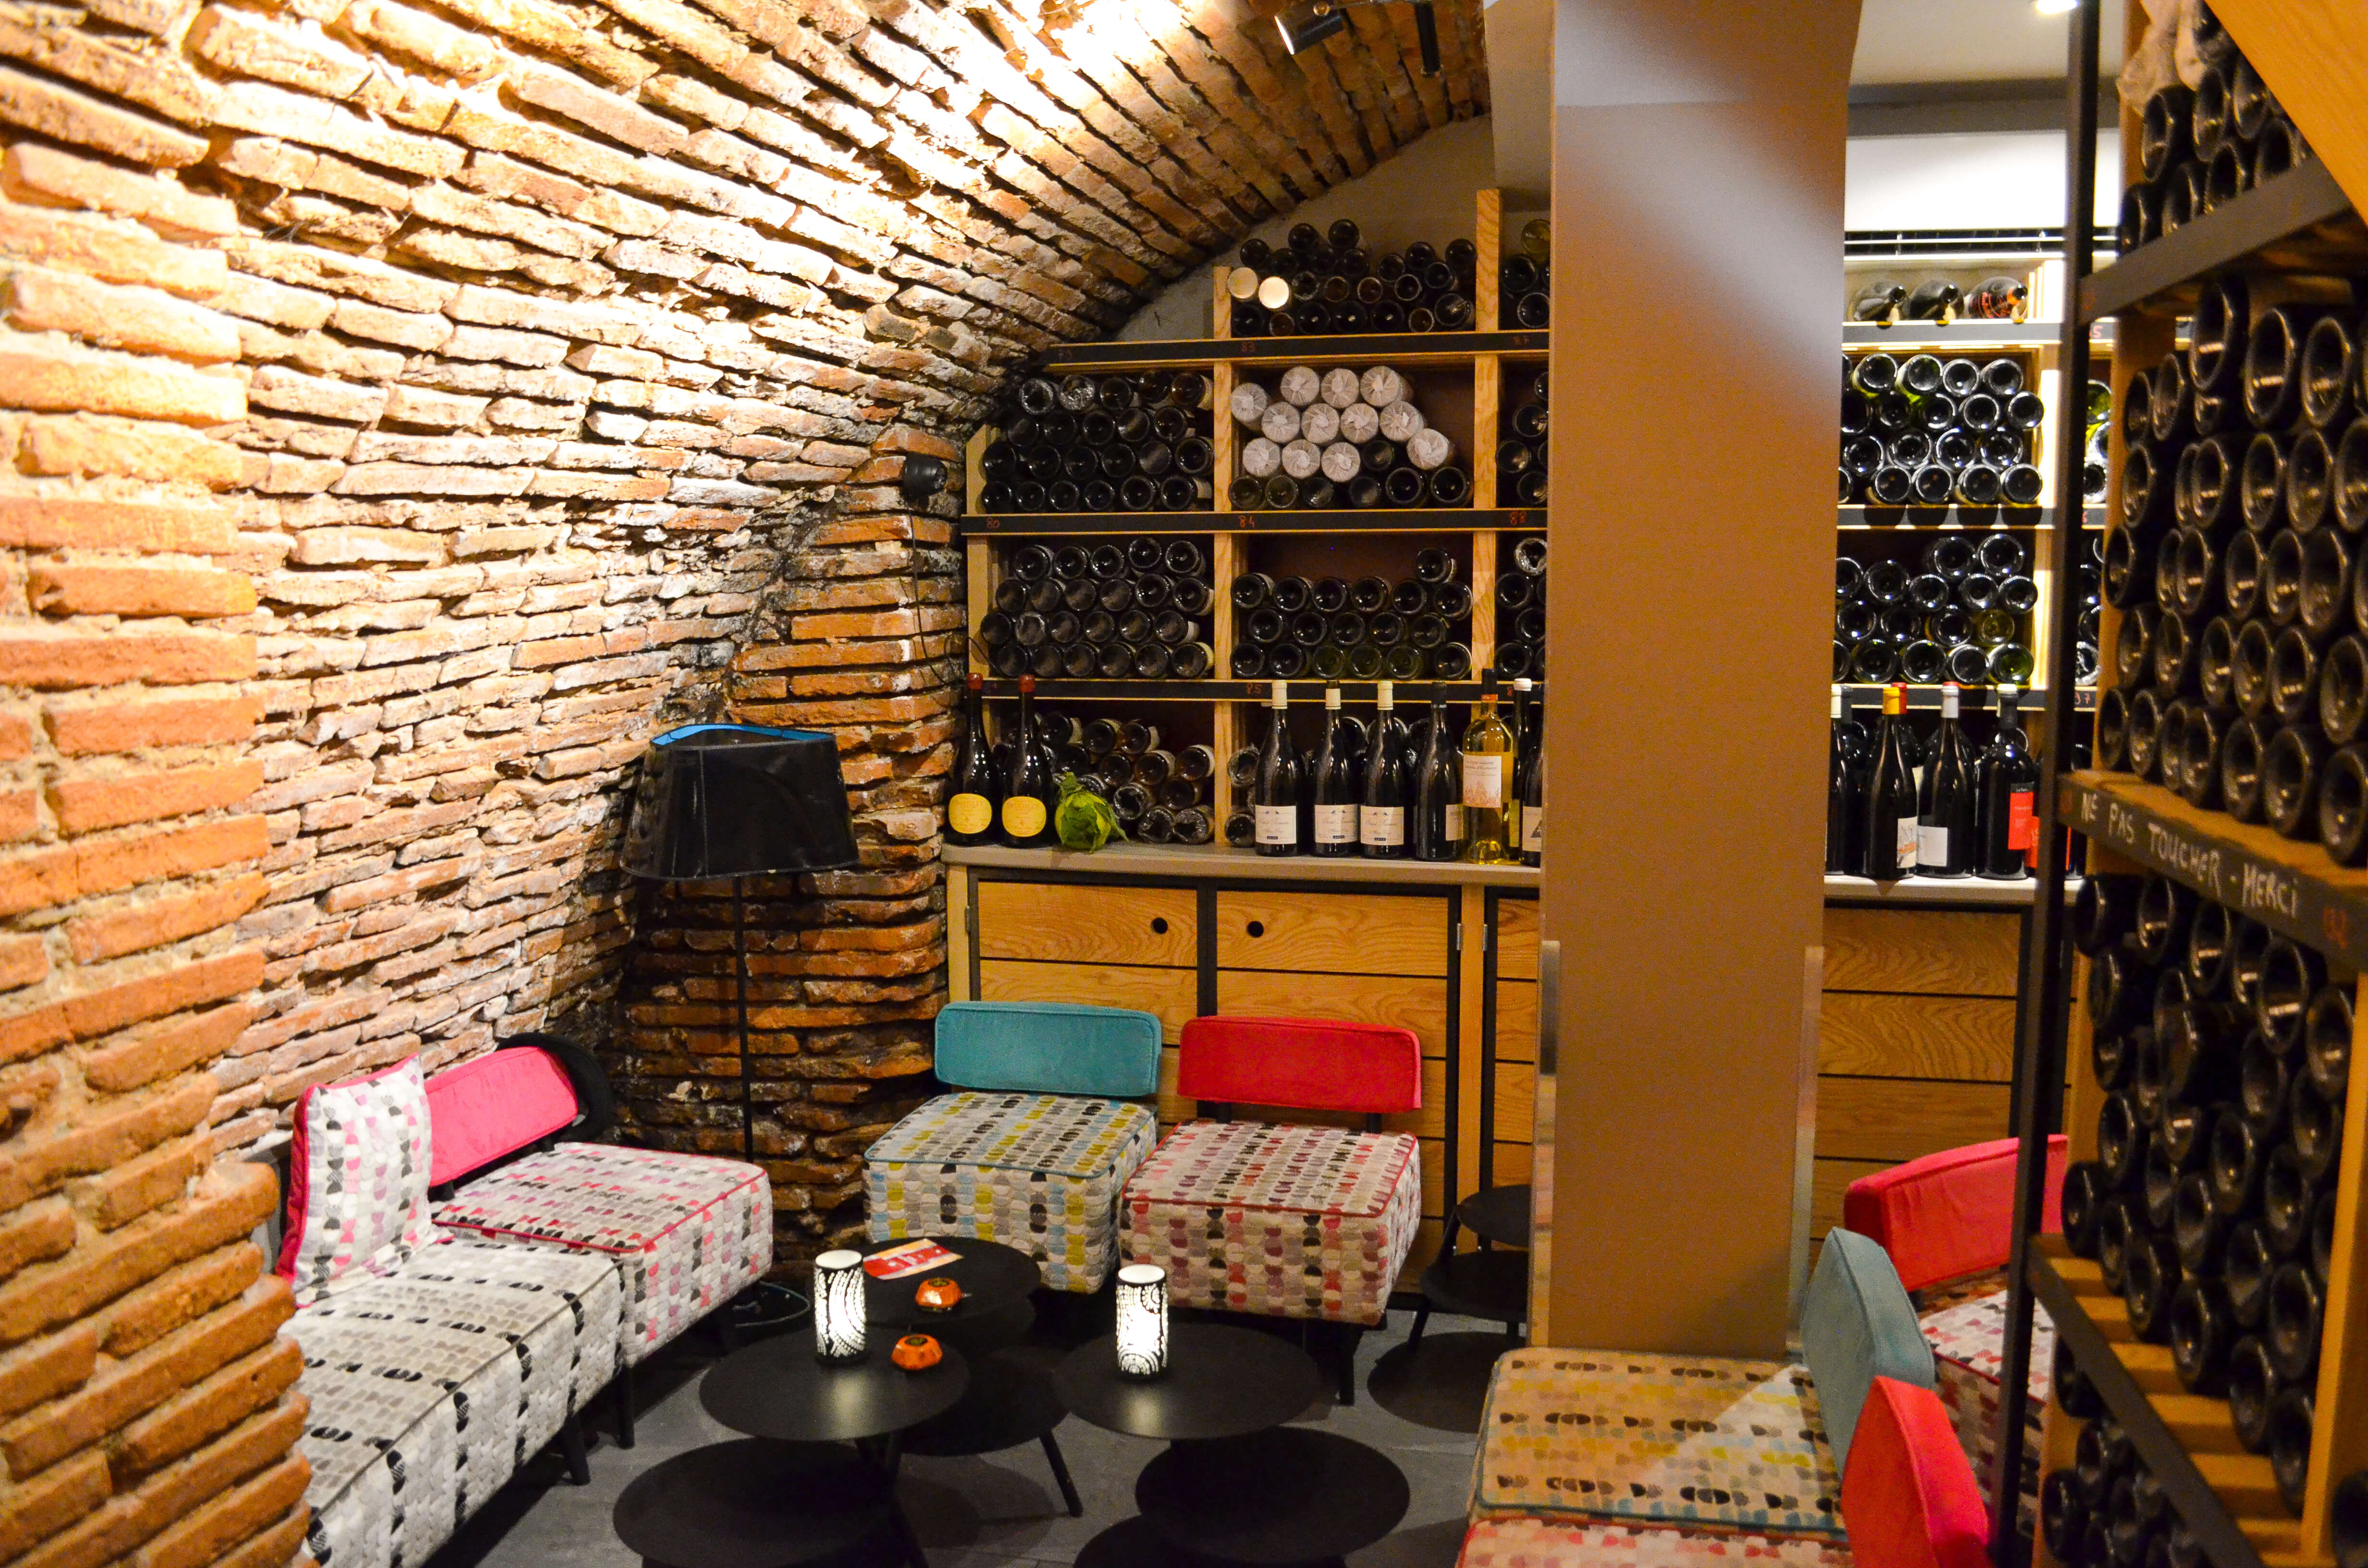 Where to drink - N5 Wine Bar in Toulouse, France